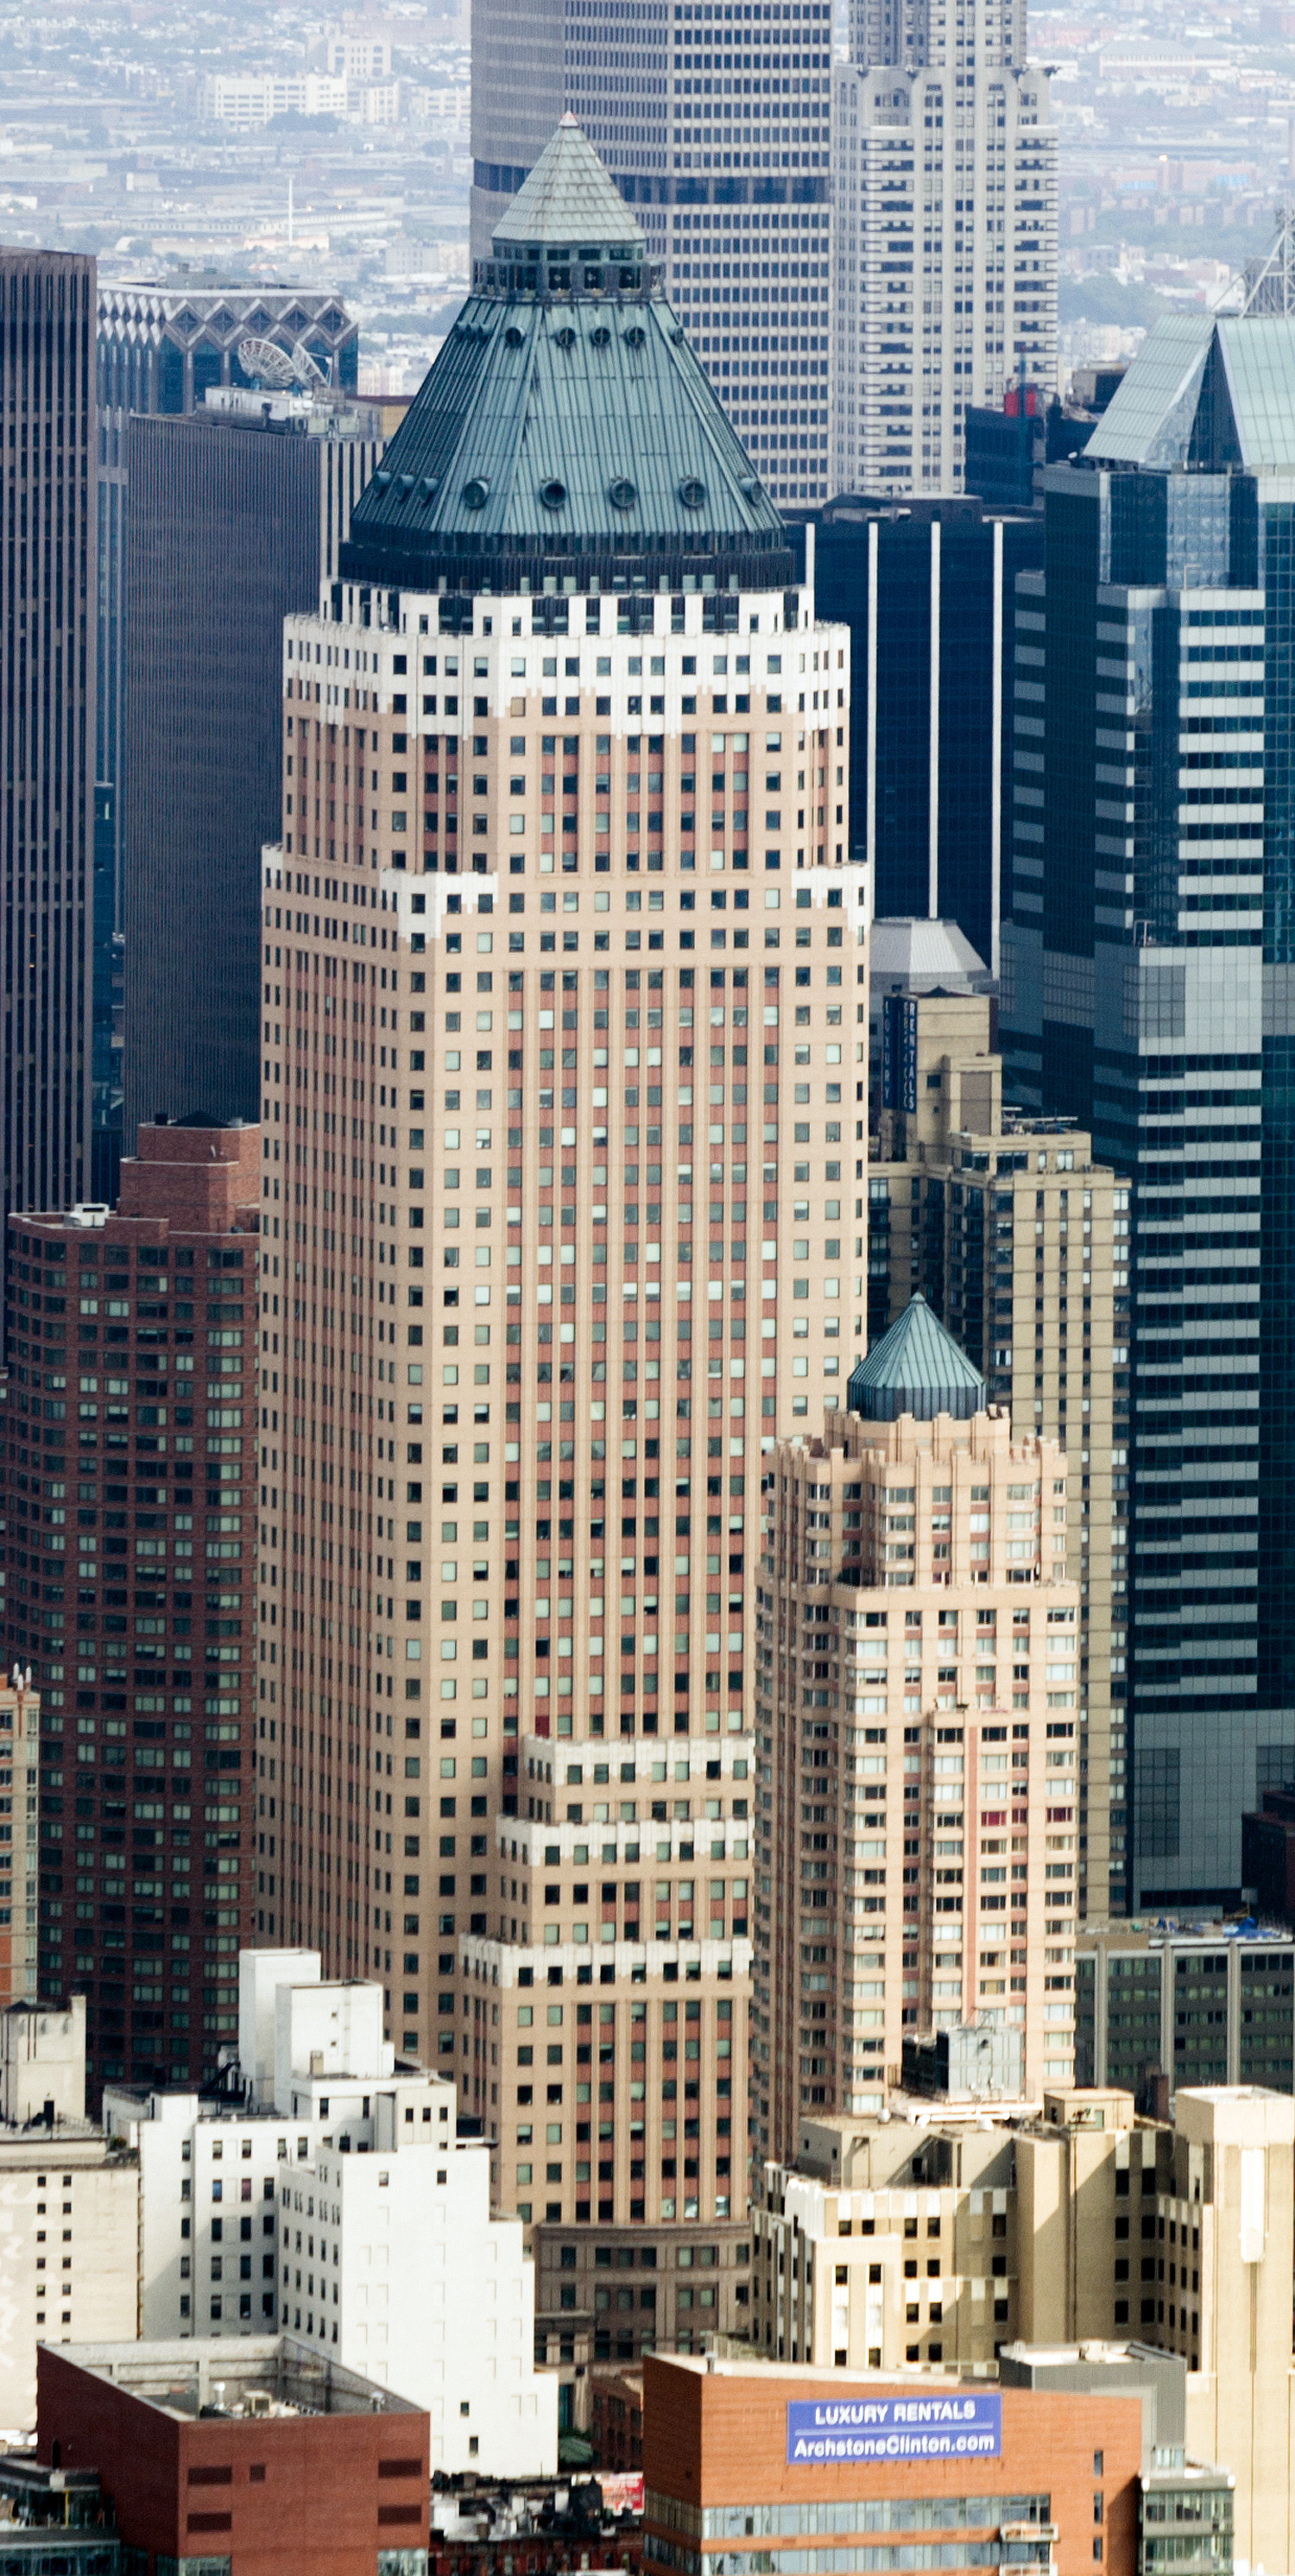 1 Worldwide Plaza, New York City - View from a helicopter. © Mathias Beinling